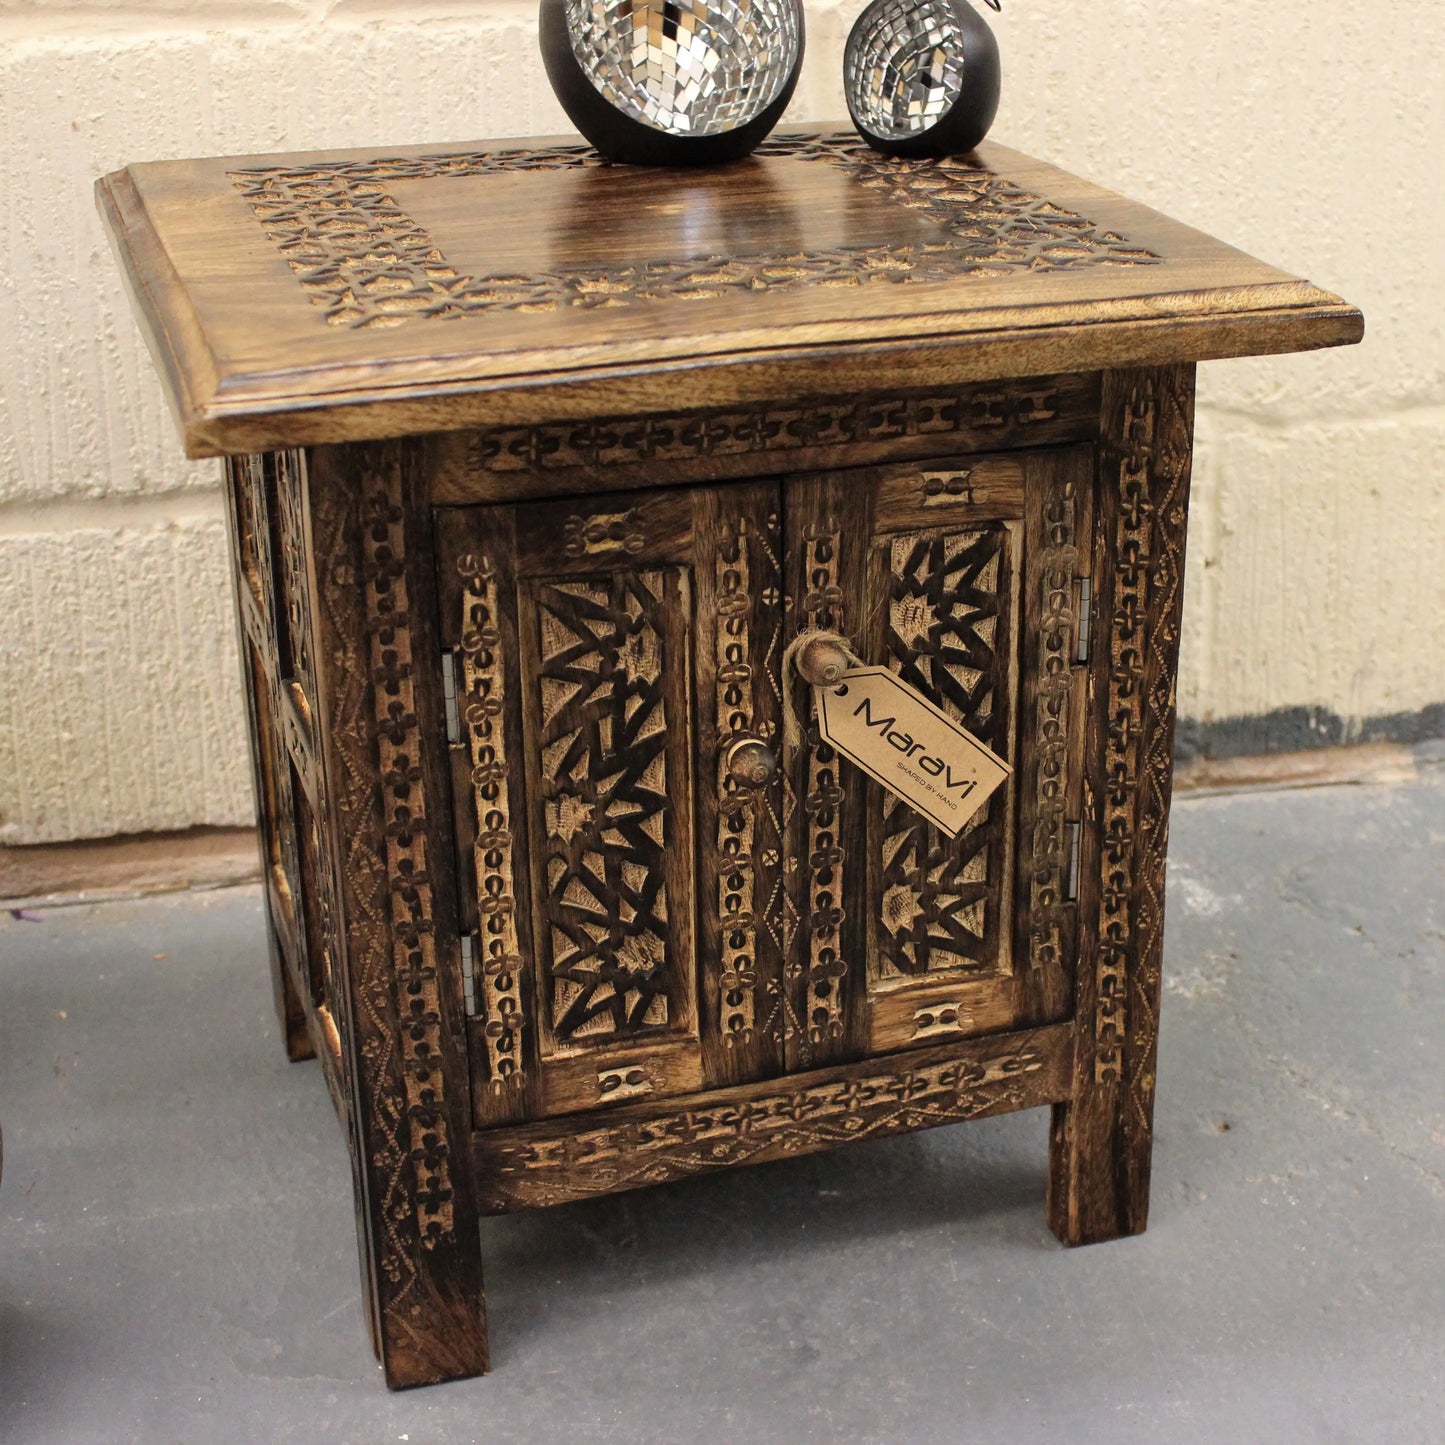 Dal Small Moroccan Style Side Table Front View Close Up